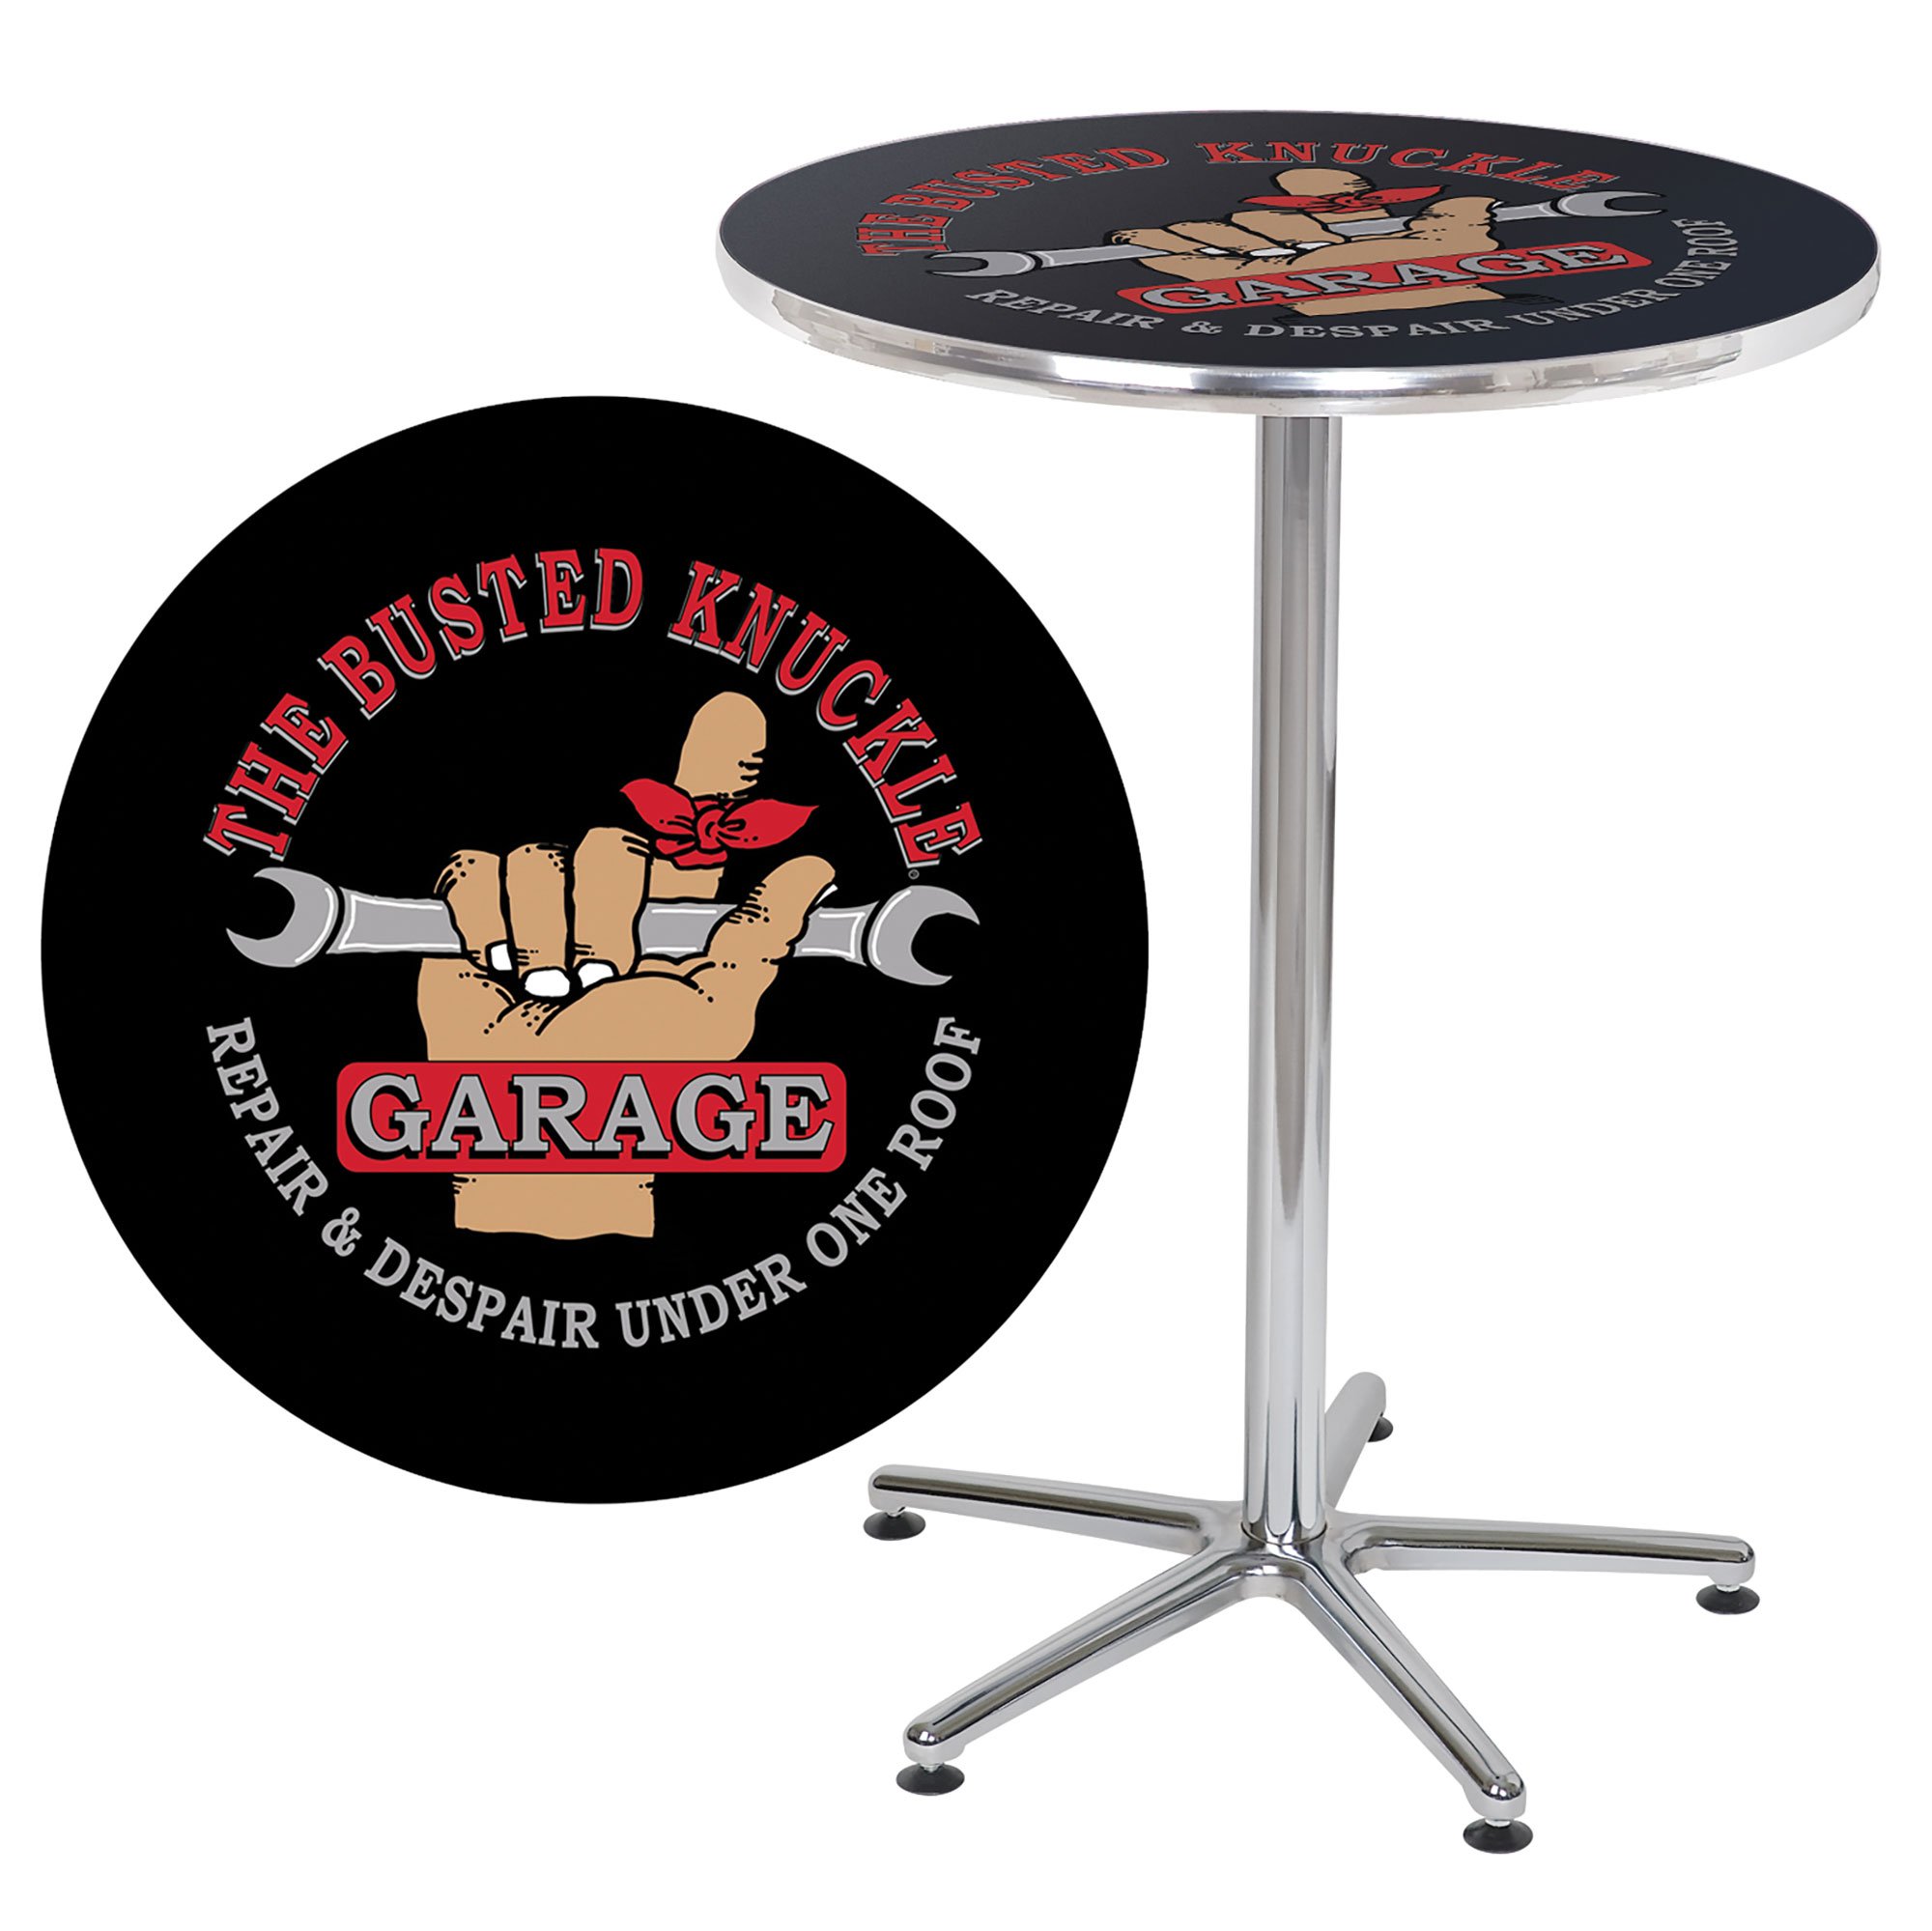 The Busted Knuckle Garage 41" Round Cafe Table